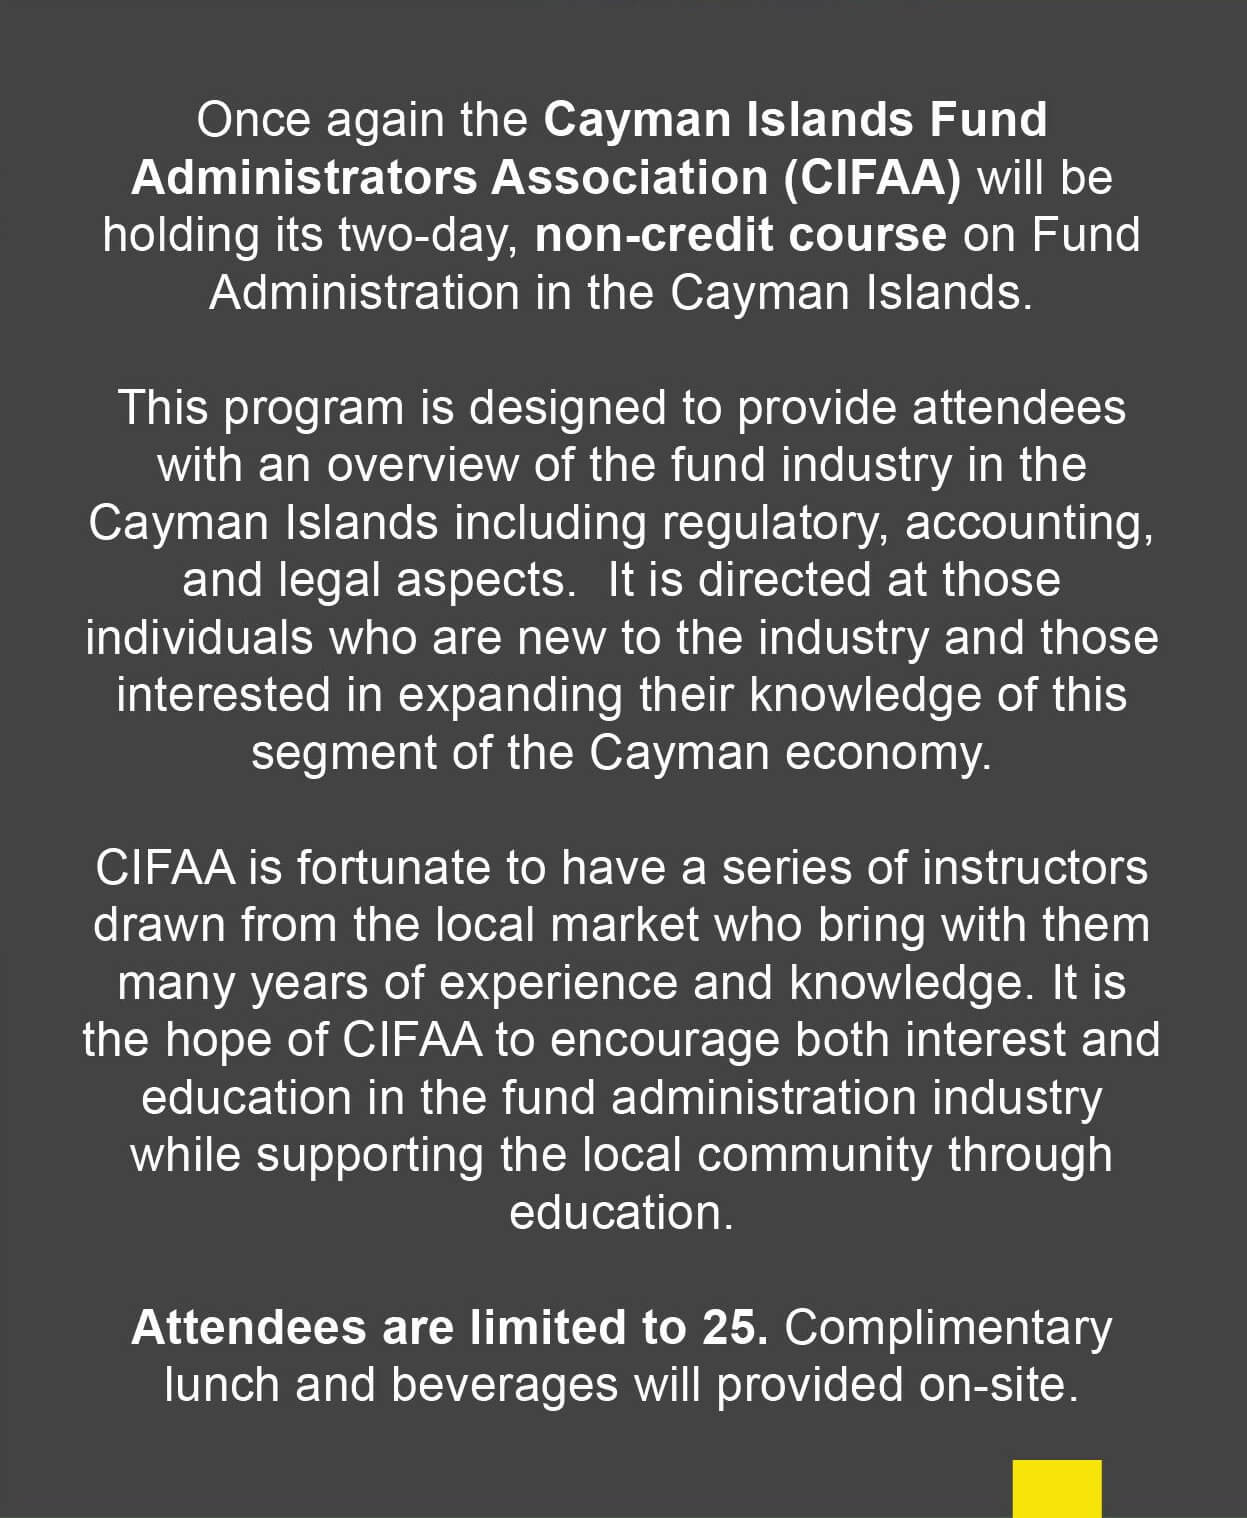 Once again the Cayman Islands Fund Administrators Association (CIFAA) will be holding its two-day, non-credit course on Fund Administration in the Cayman Islands. This program is designed to provide attendees with an overview of the fund industry in the Cayman Islands including regulatory, accounting and legal aspects. It is directed at those individuals who are new to the industry and those interested in expanding their knowledge of this segment of the Cayman economy. CIFAA is fortunate to have a series of instructors drawn from the local market who bring with them many years of experience and knowledge. It is the hope of CIFAA to encourage both interest and education in the fund administration industry while supporting the local community through education. Attendees are limited to 25. Complimentary lunch and beverages will be provided on-site. 